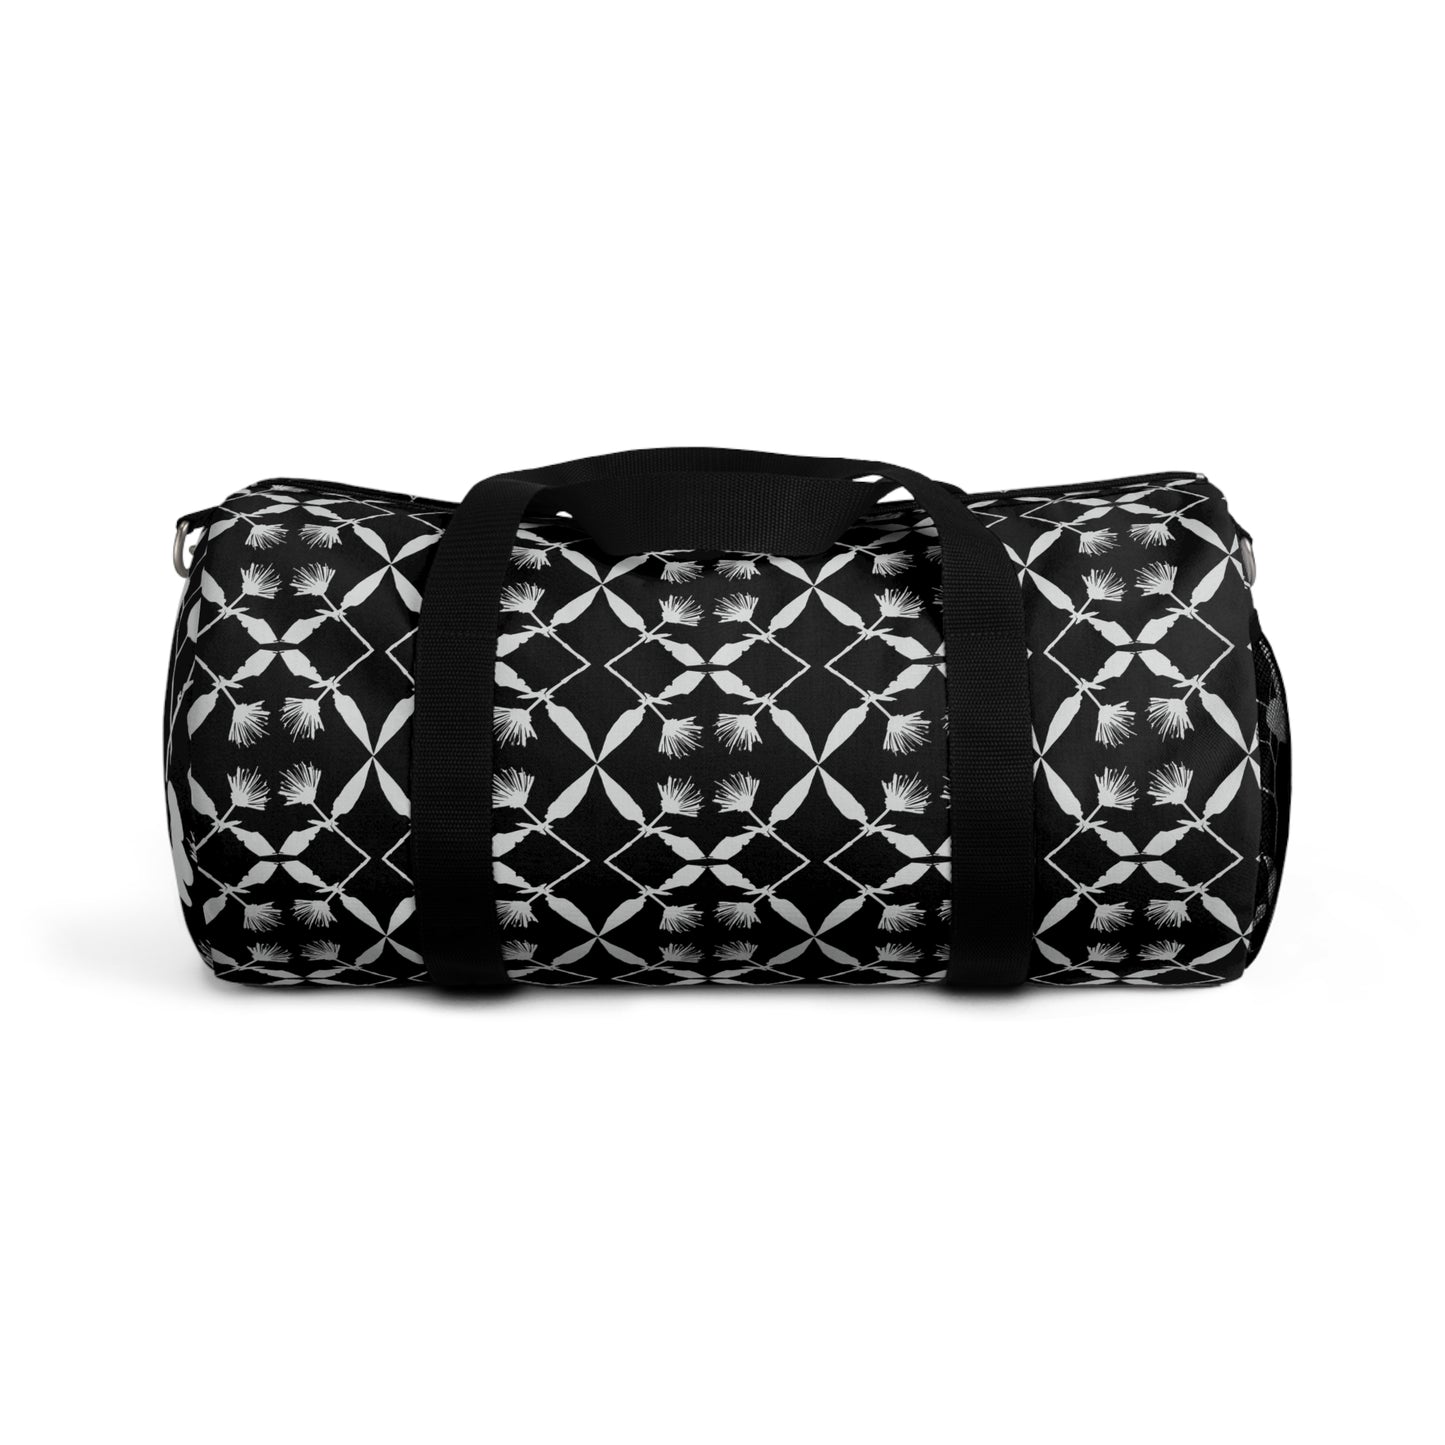 Black and White Floral Duffel Bag